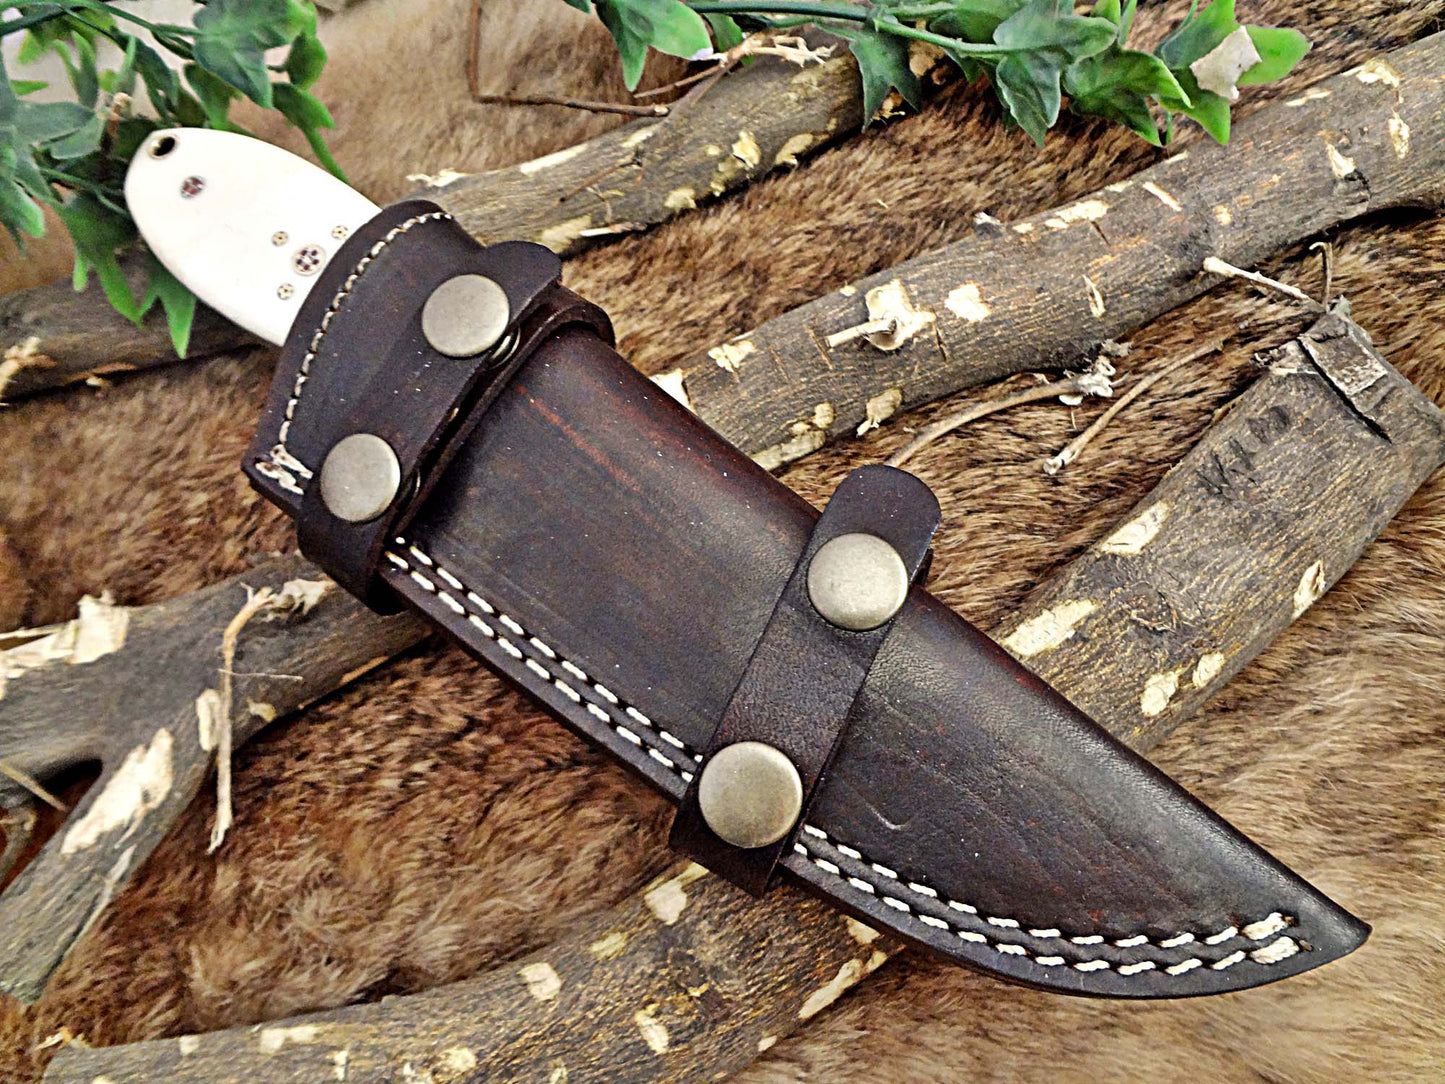 9" Long hand forged Damascus steel full tang skinning Knife with gut hook, Bull horn with Damascus Bolster, Cow hide Leather sheath